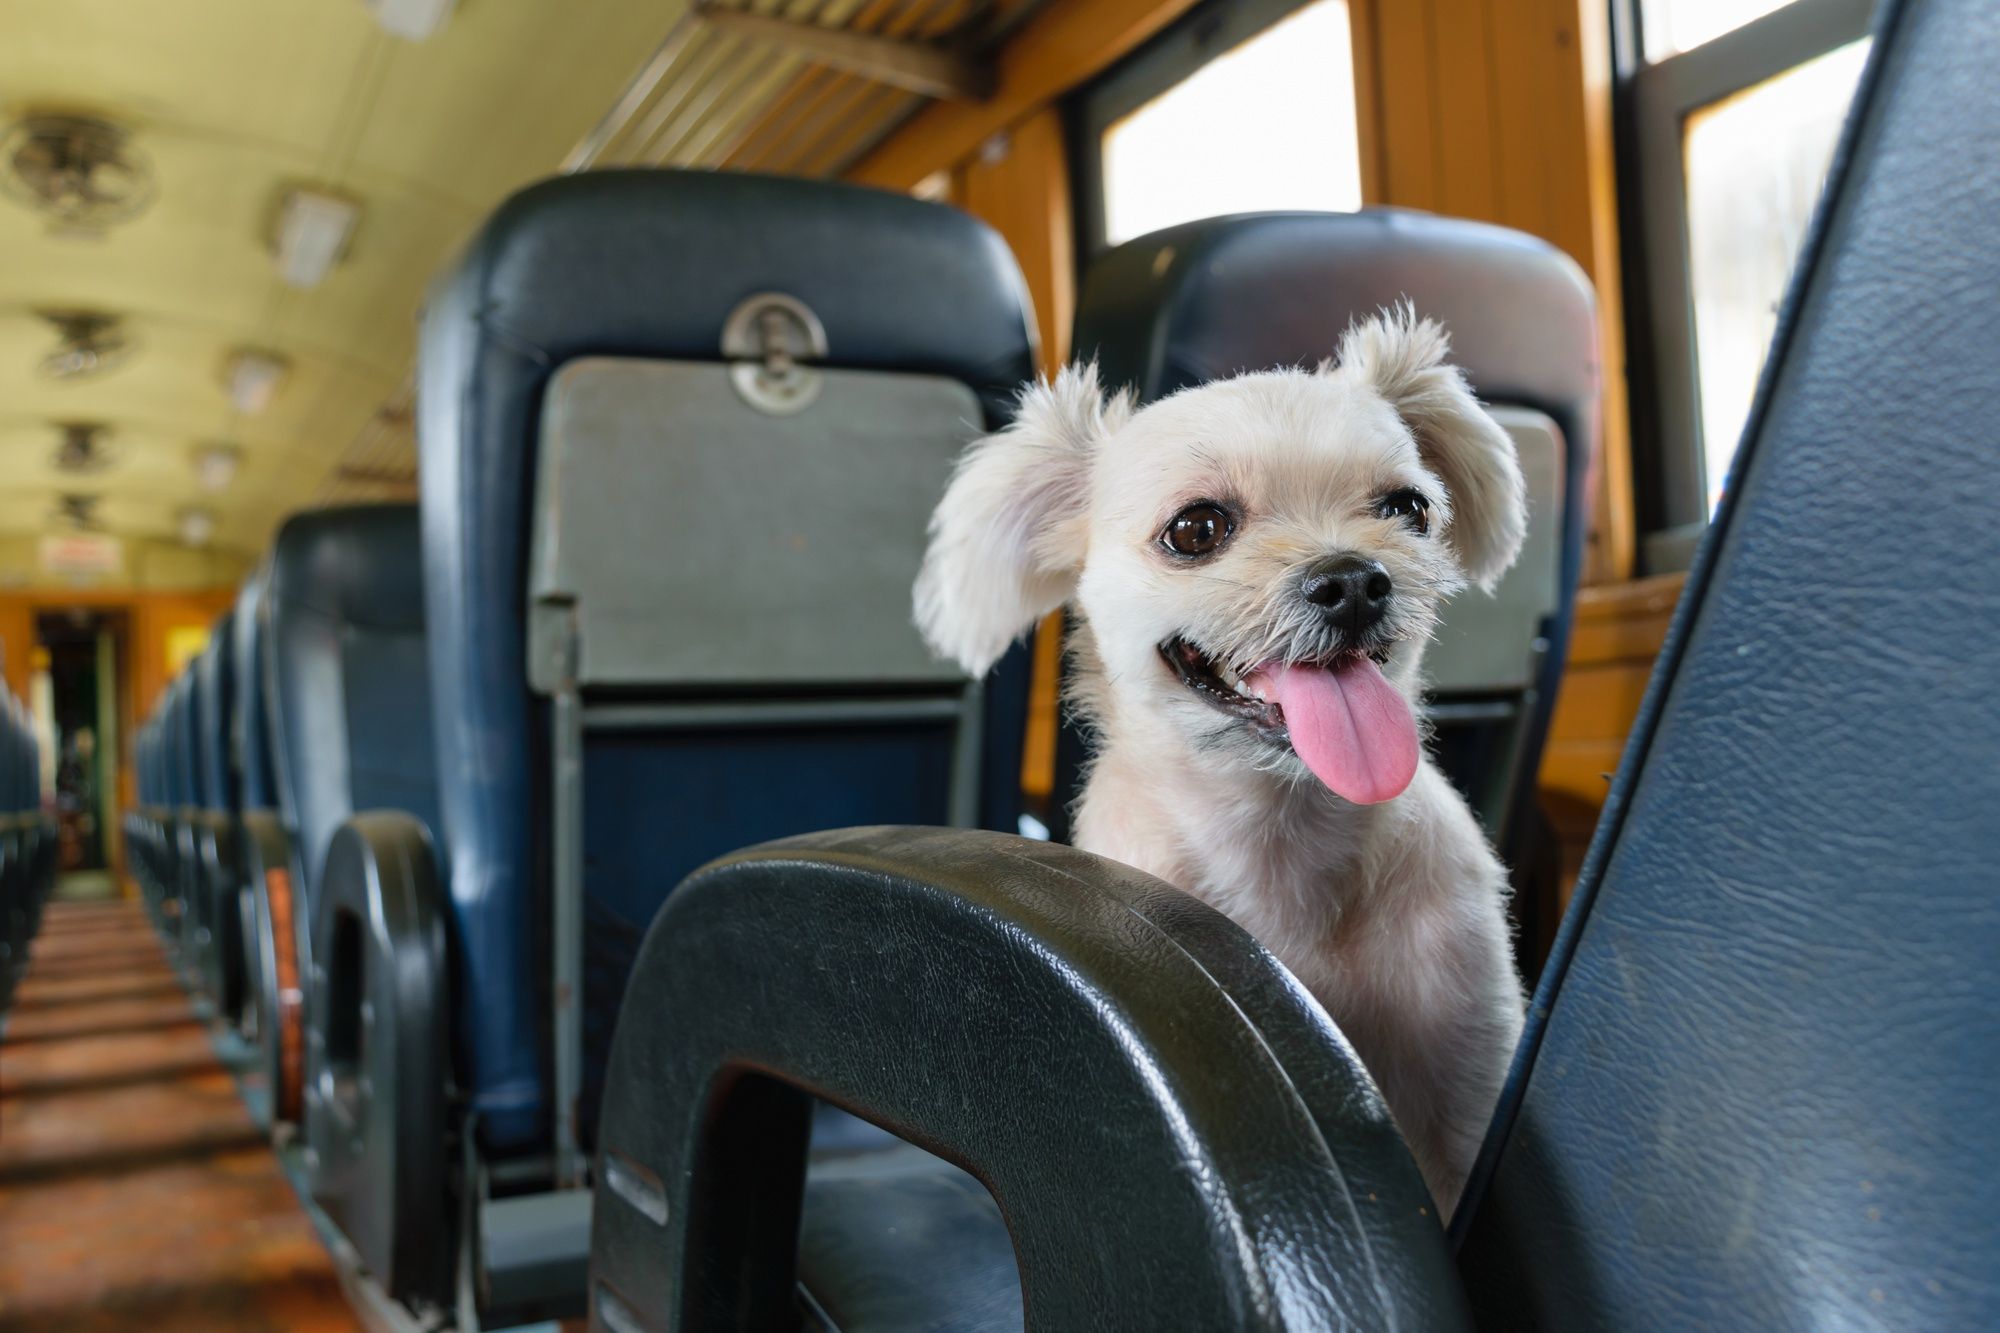 Bringing Fido Along: A Guide to Amtrak's Dog-Friendly Rules